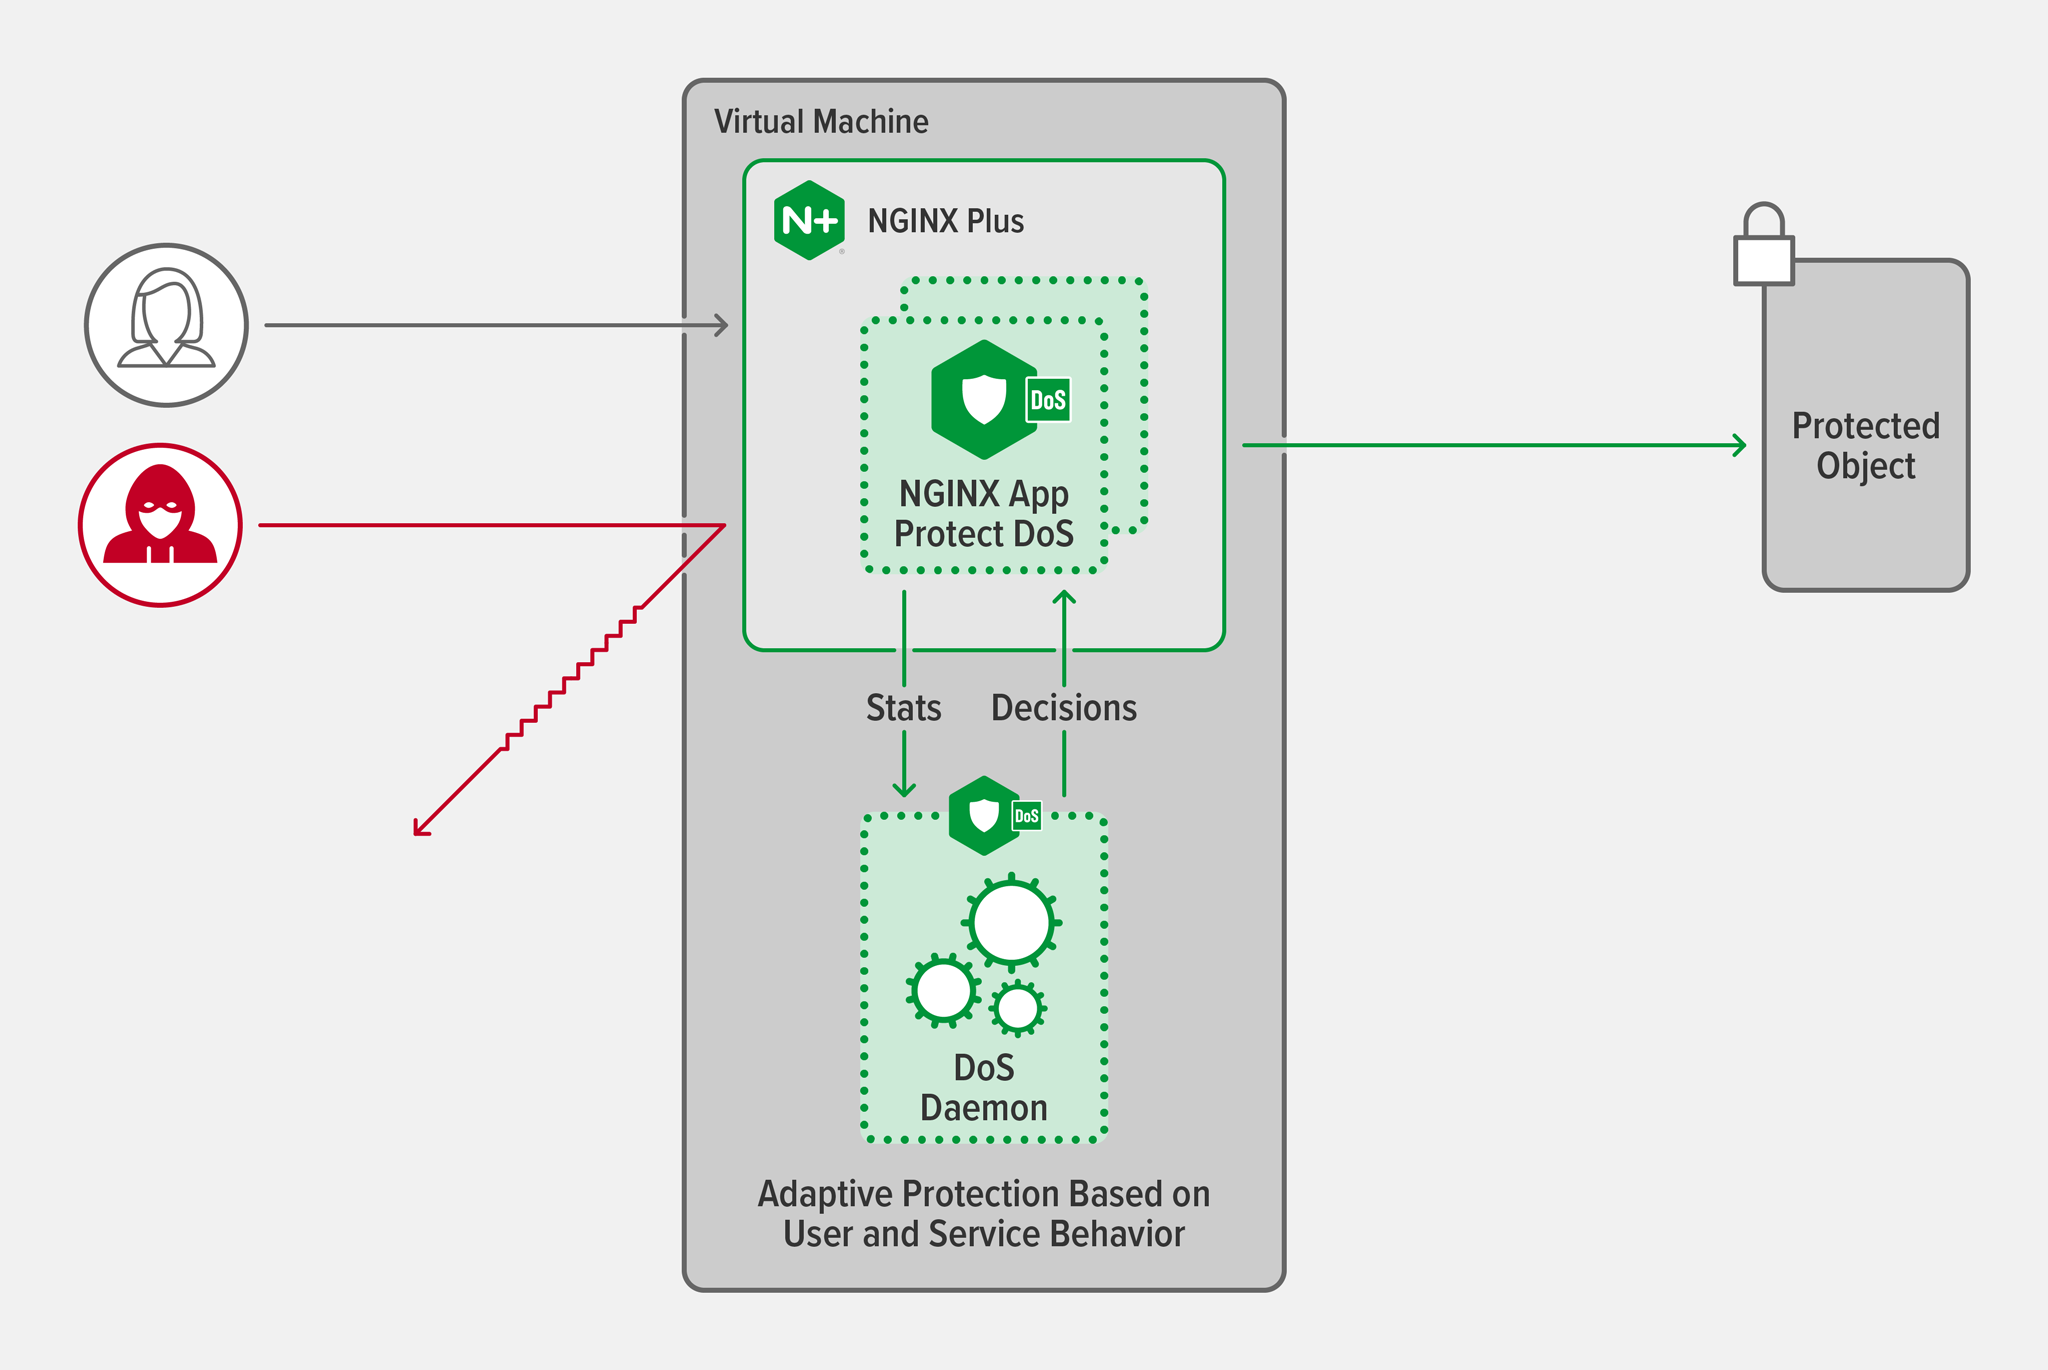 Topology diagram showing how NGINX App Protect DoS reduces false positives by combining multiple approaches: analyzing user behavior, checking service health checks, and measuring the effectiveness of mitigation tactics